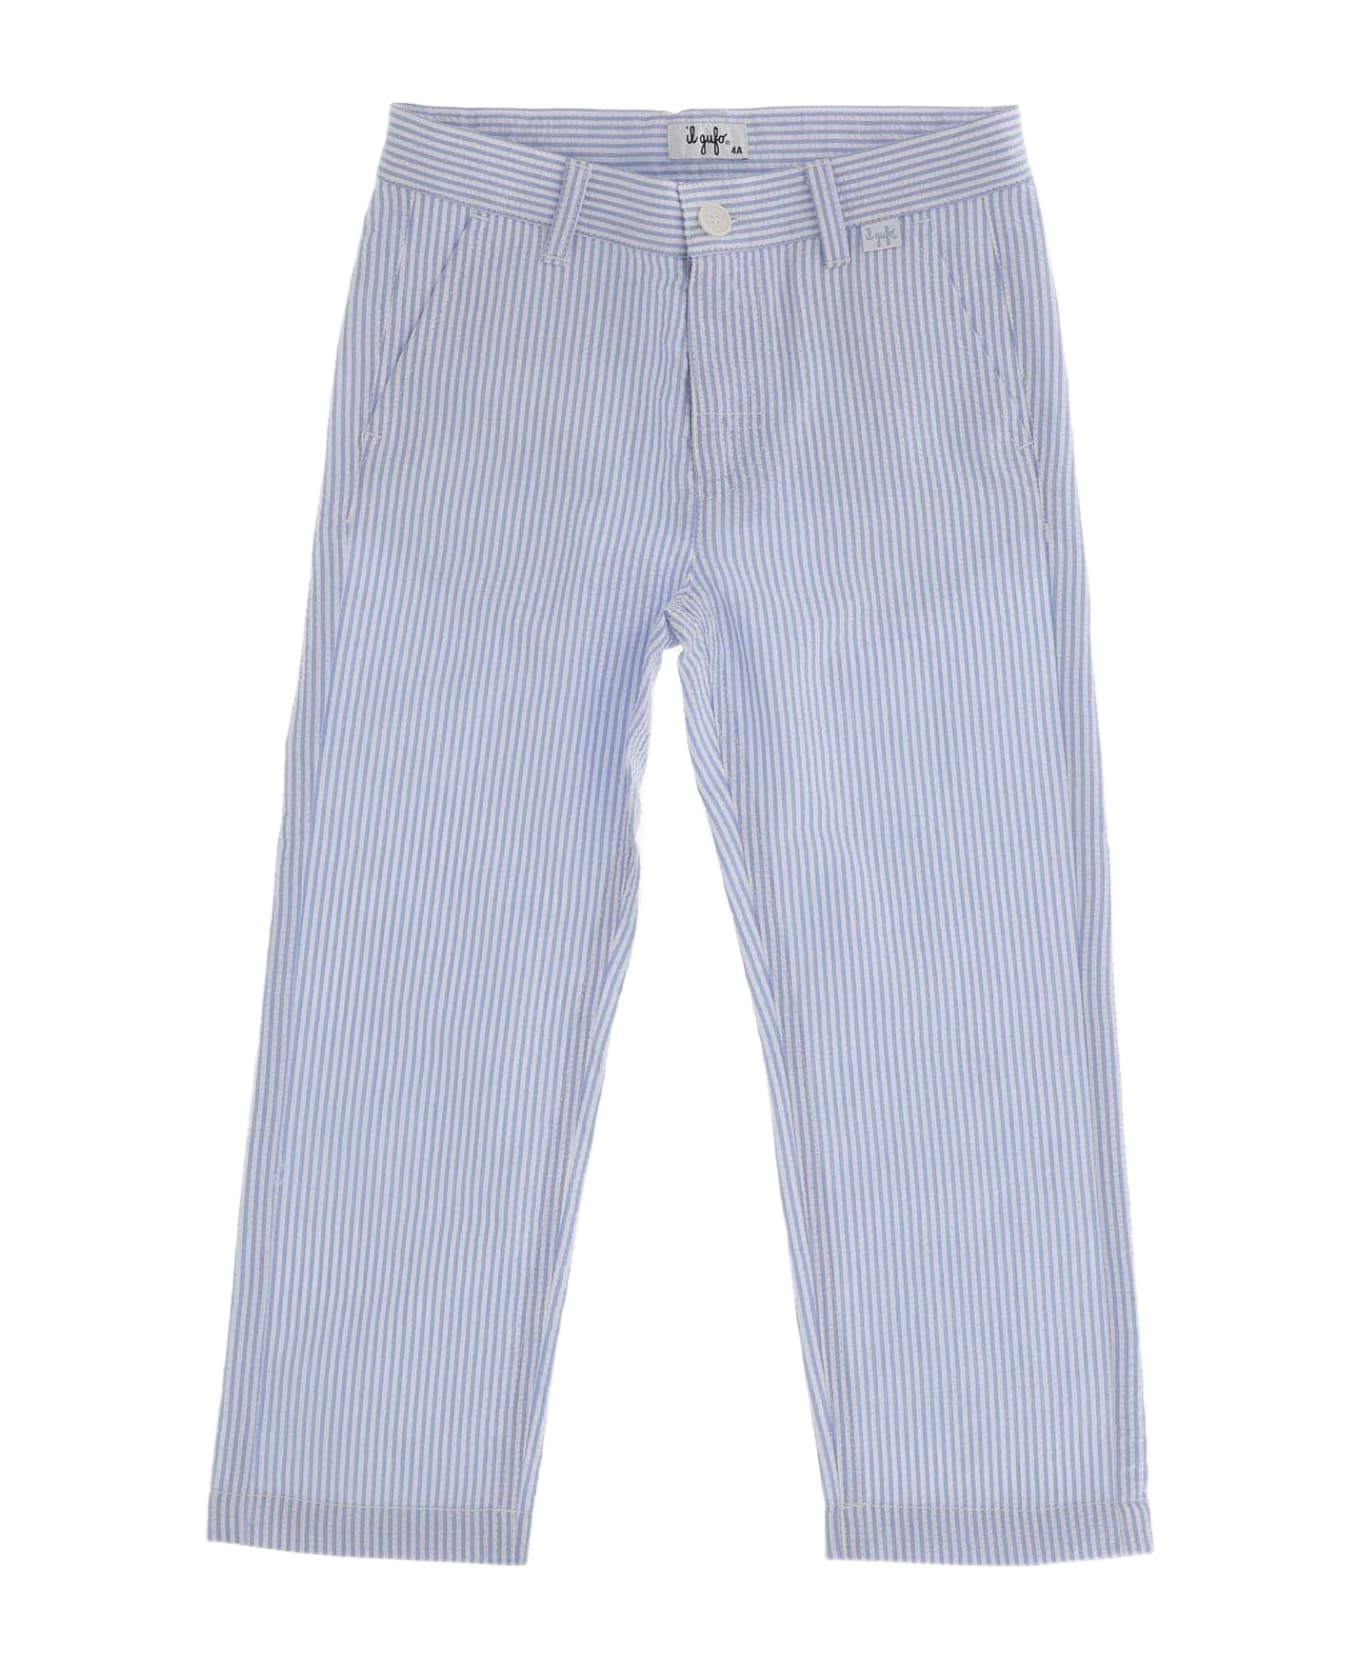 Il Gufo Cotton Pants With Striped Pattern - Clear Blue ボトムス